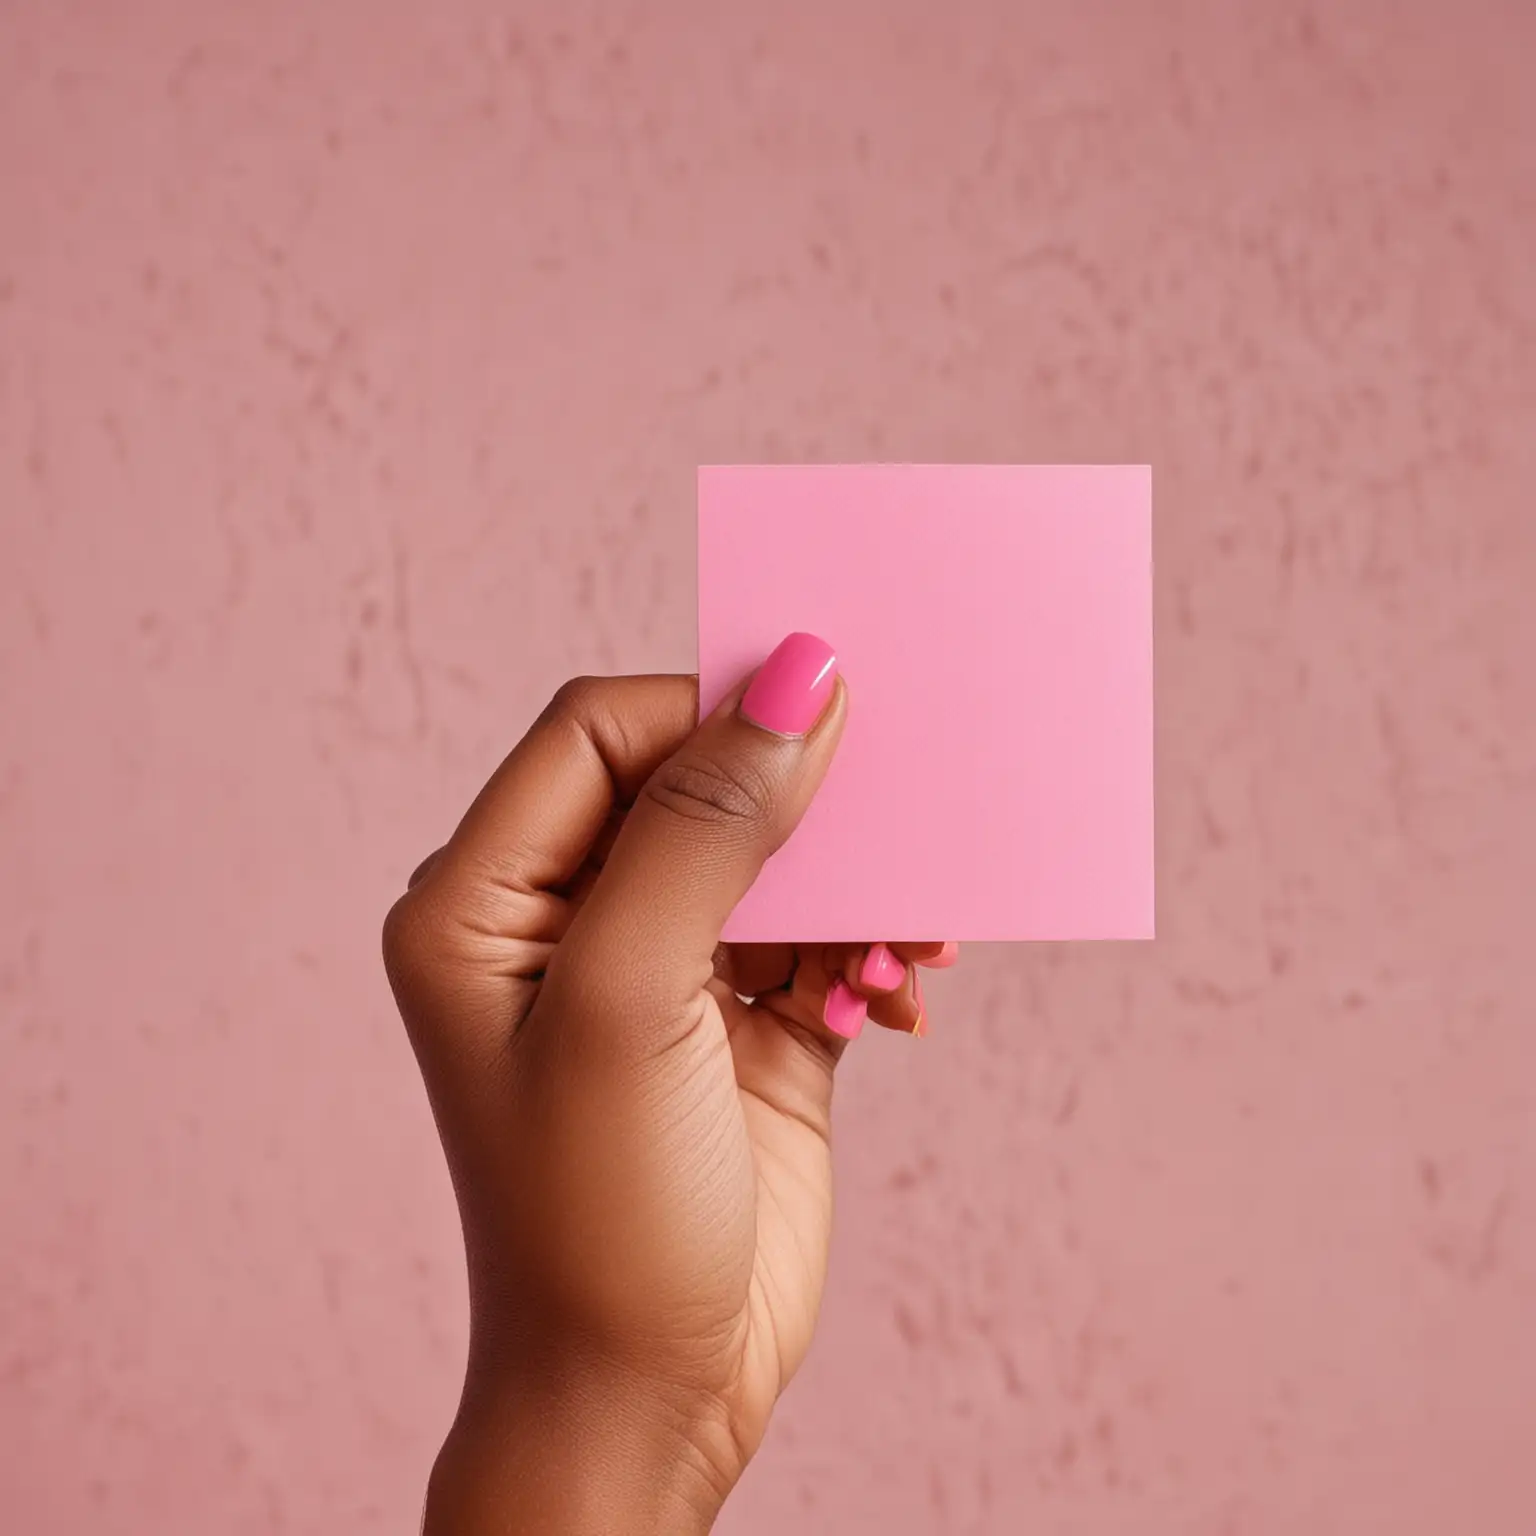 African American Hand with Pink Square Shaped Nails Holding Card